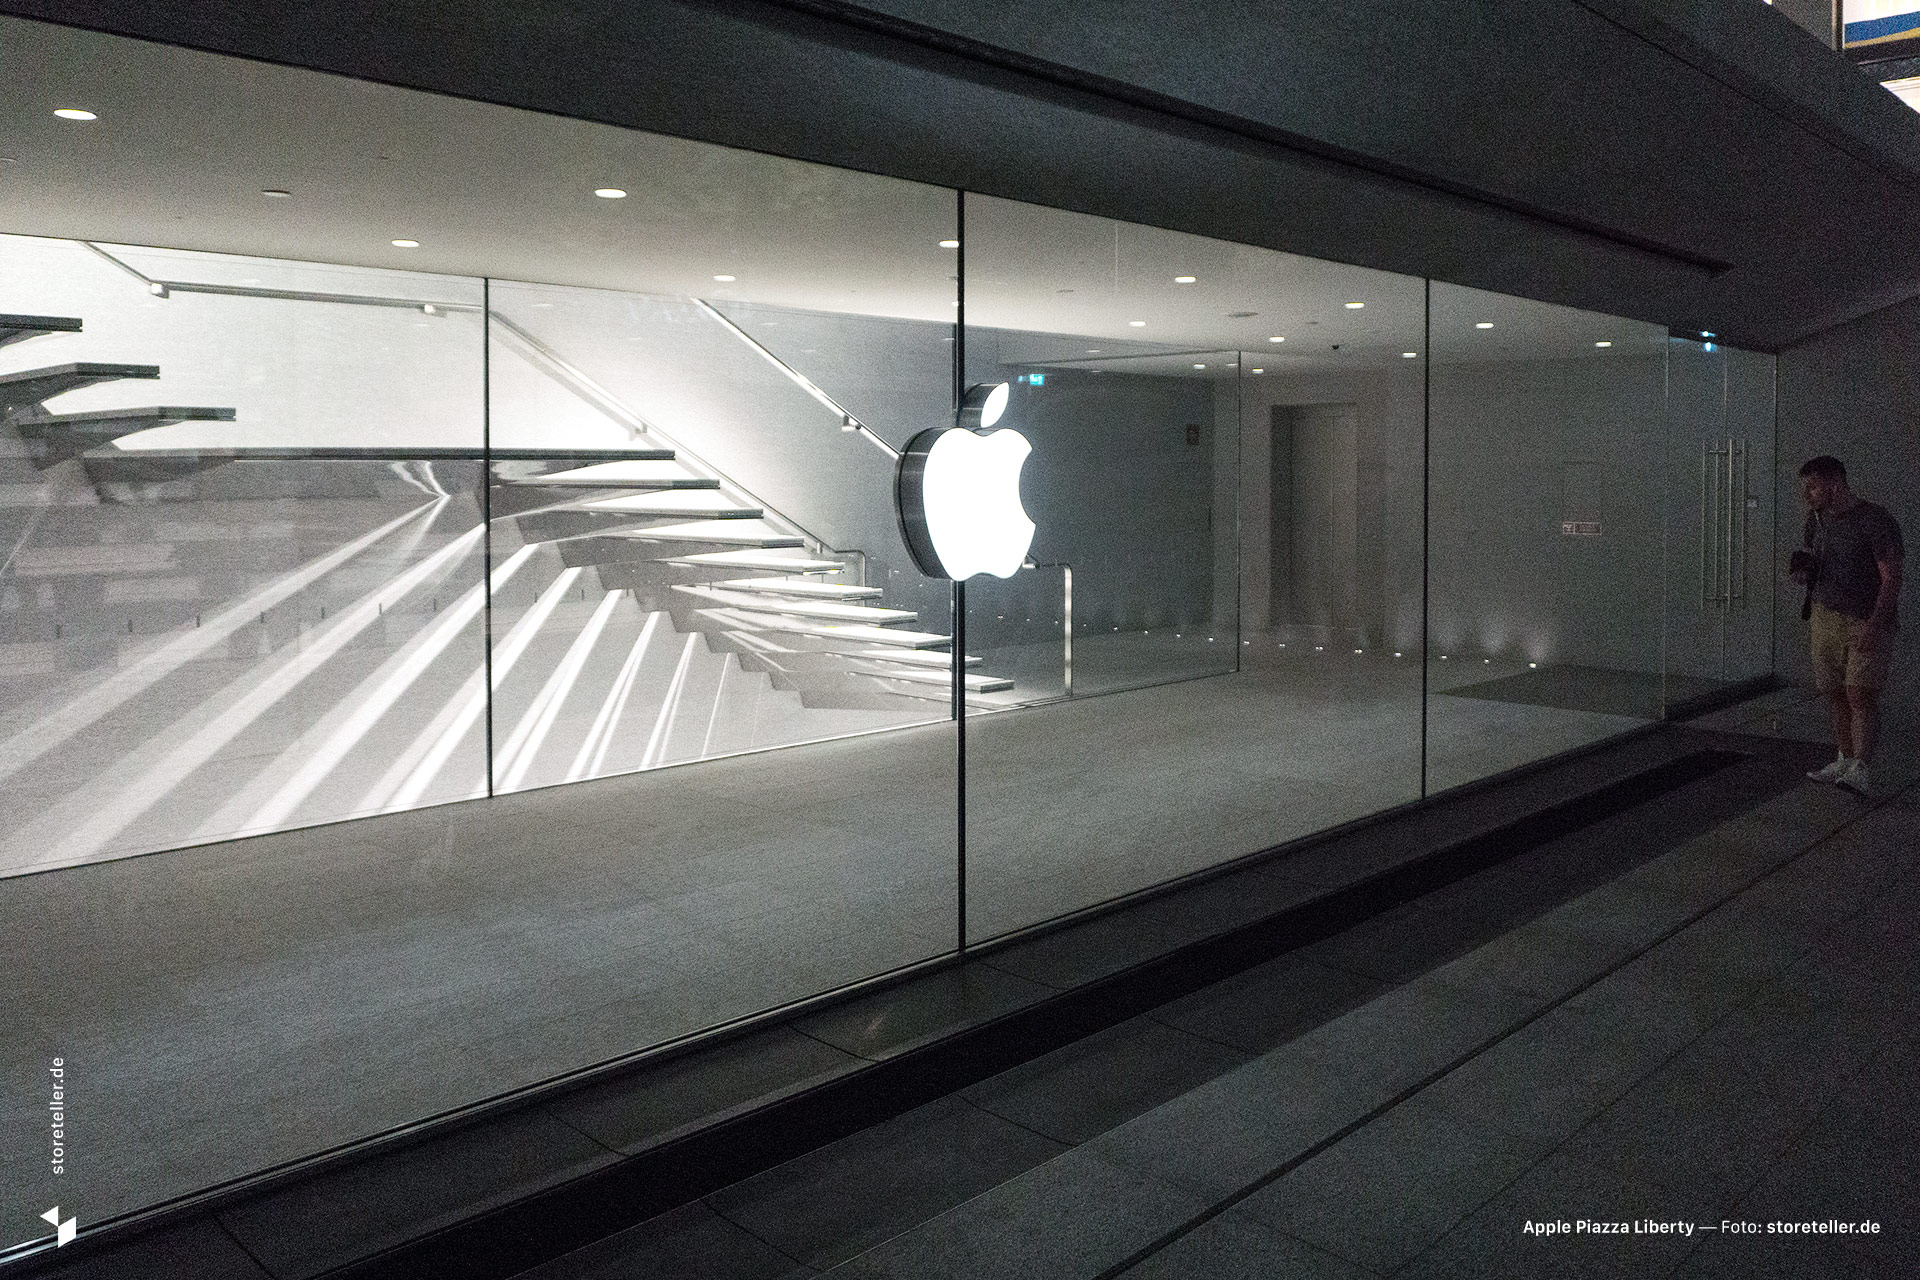 Apple Piazza Liberty in Mailand